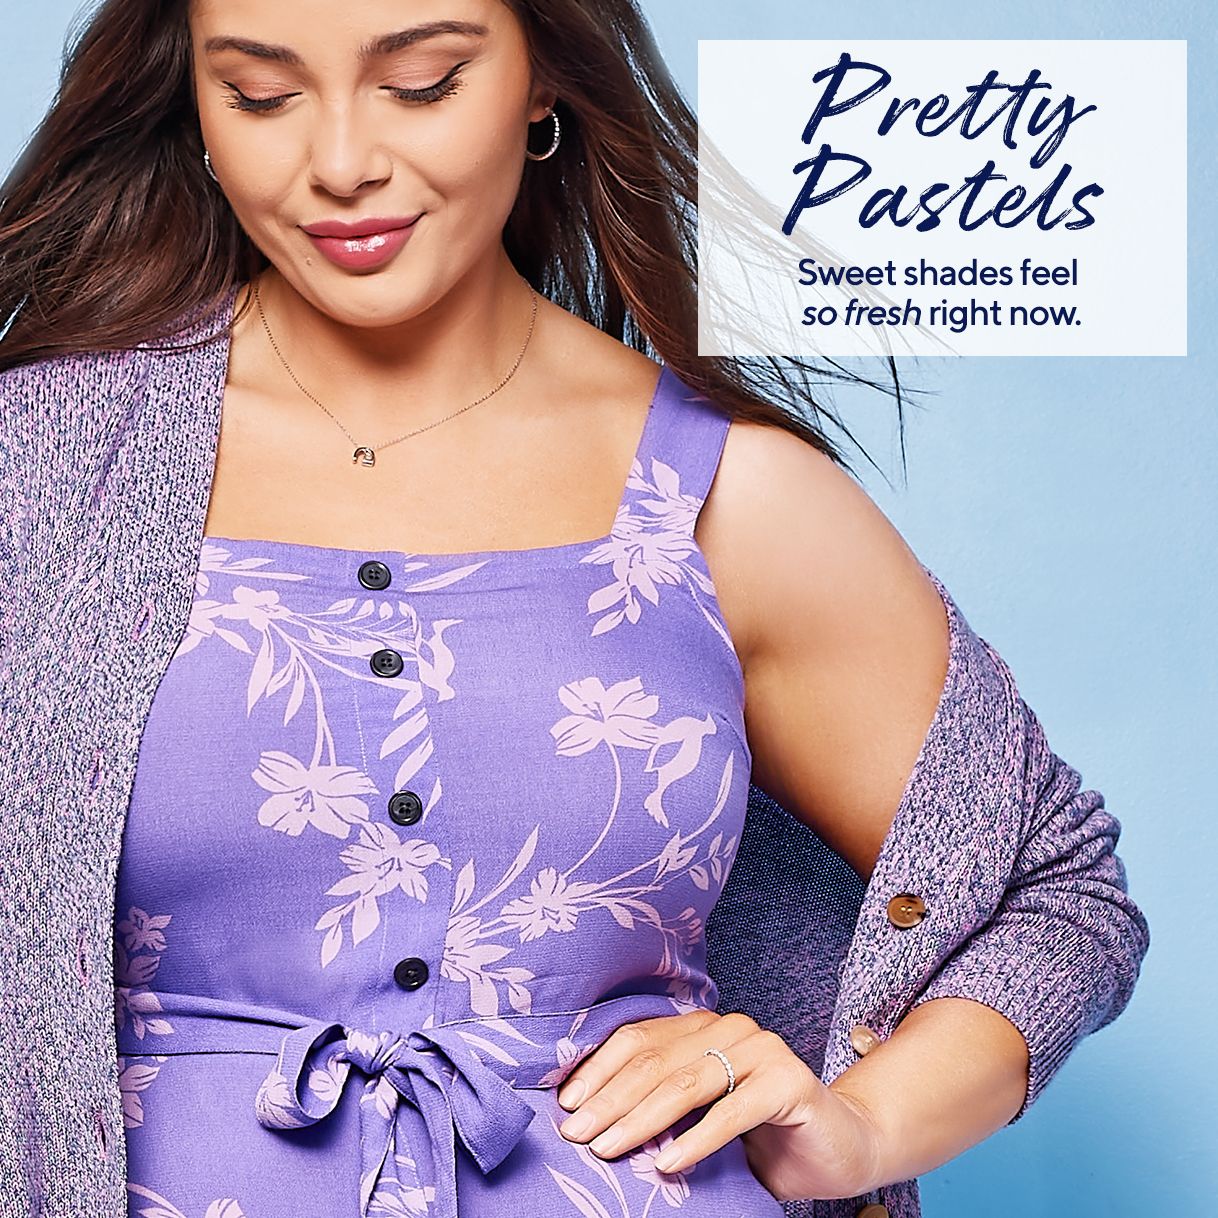 Pretty Pastels: Sweet shades feel so fresh right now.